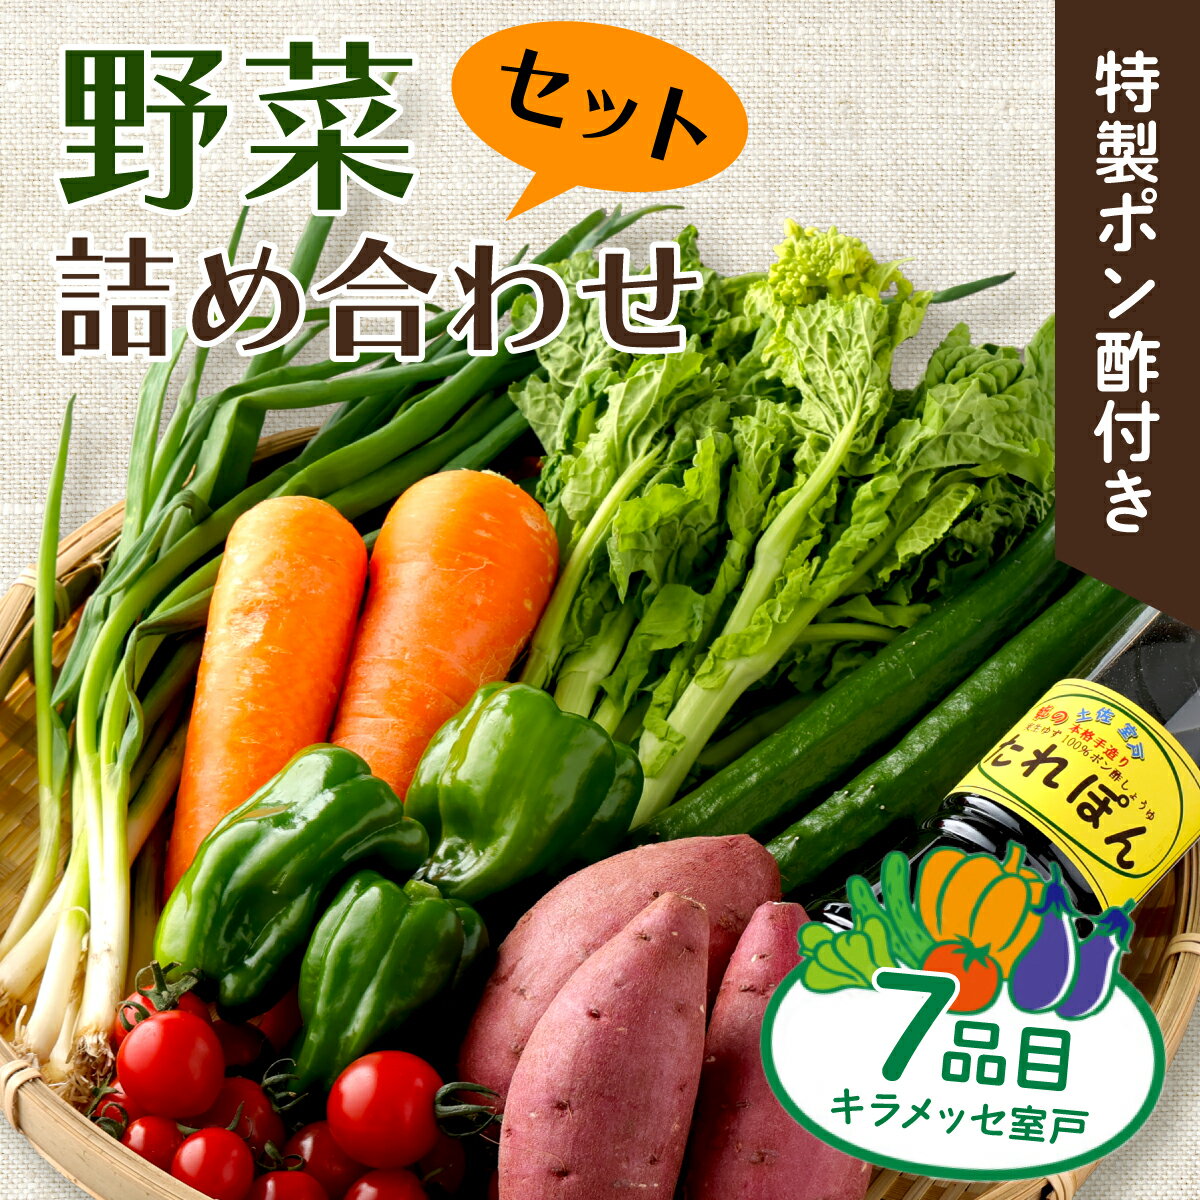 【<strong>ふるさと納税</strong>】【コロナ緊急支援品】野菜 7種類 詰め合わせセット(特製<strong>ポン酢</strong>付) 新鮮 旬 春 おまかせ 5000円 故郷納税 送料無料